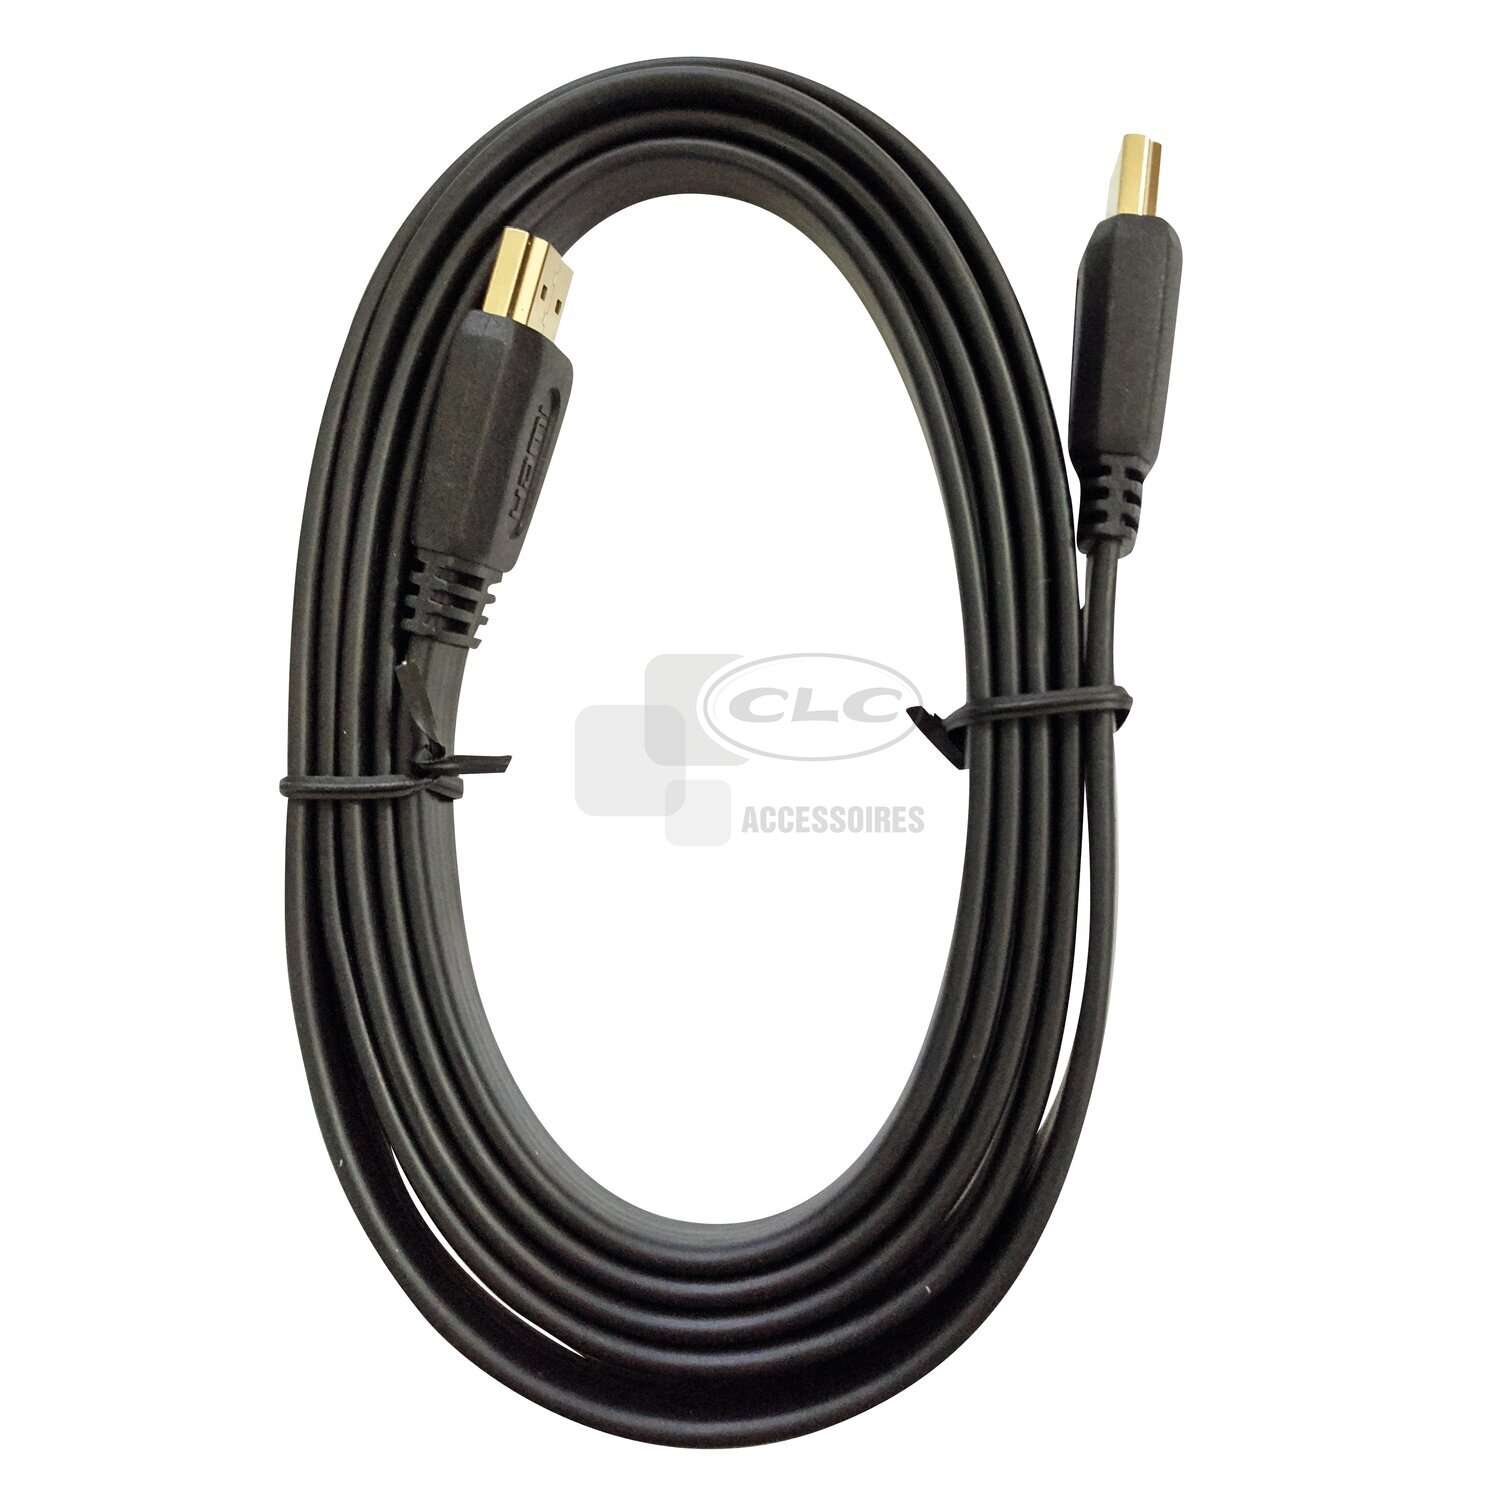 Cable HDMI 1,5m Gold 572110